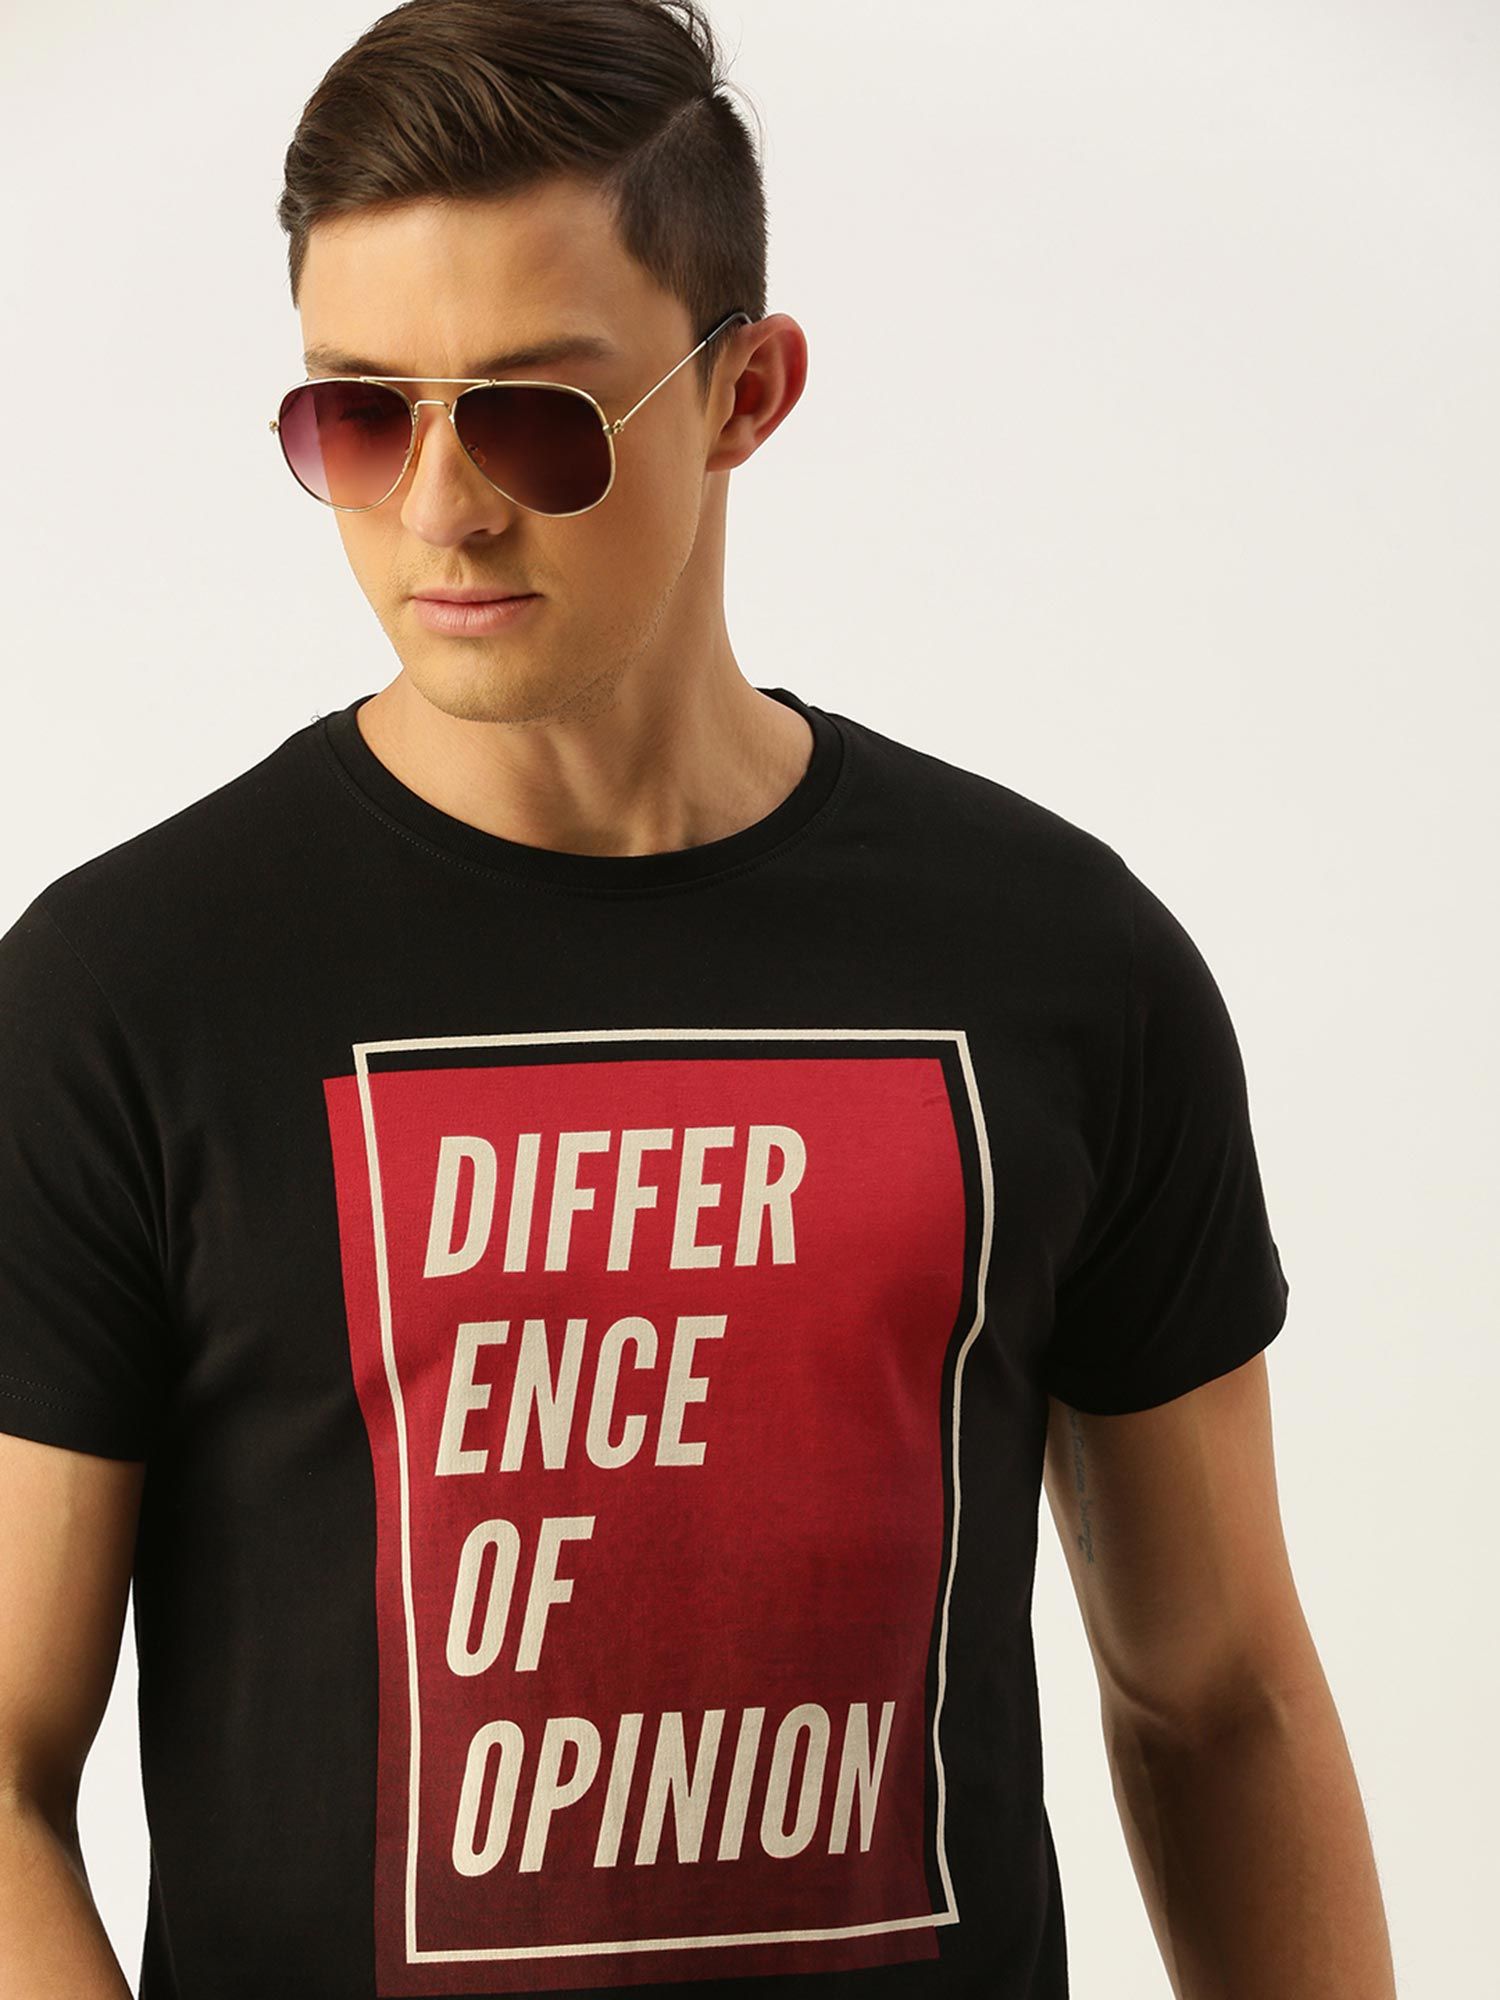 Difference of Opinion Printed T-Shirt (S)